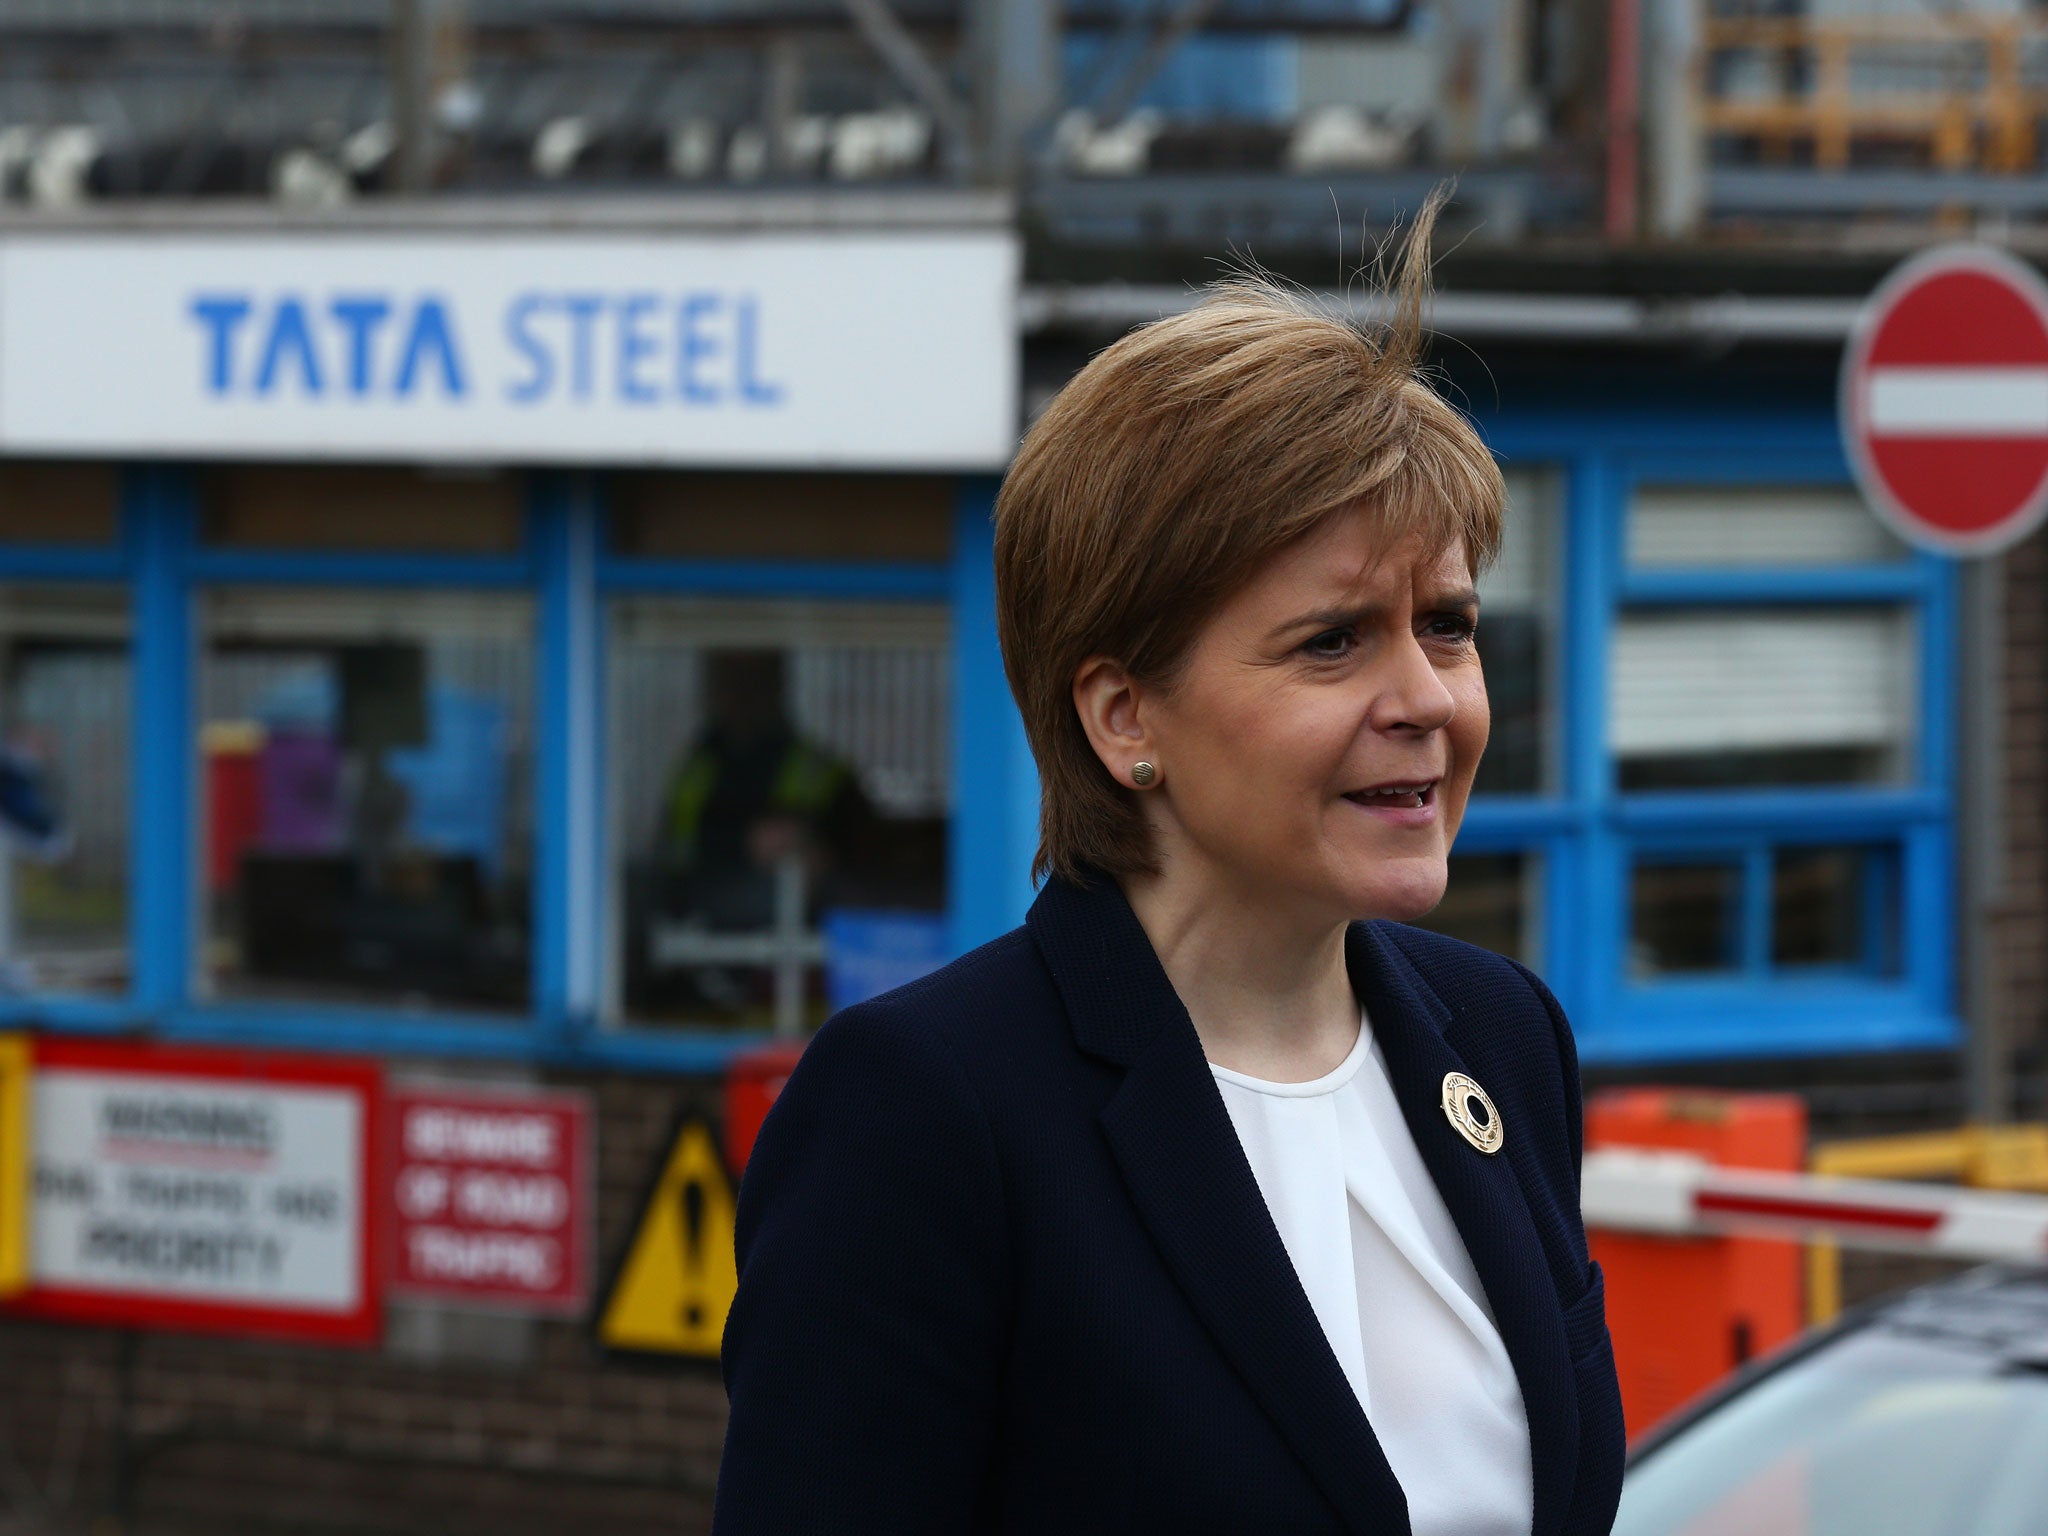 Scottish First Minister Nicola Sturgeon speaking to the media outside the Tata Steel plant in Motherwell last year. The SNP says that Scotland will not be bound to using Chinese steel for Scottish infrastructure projects